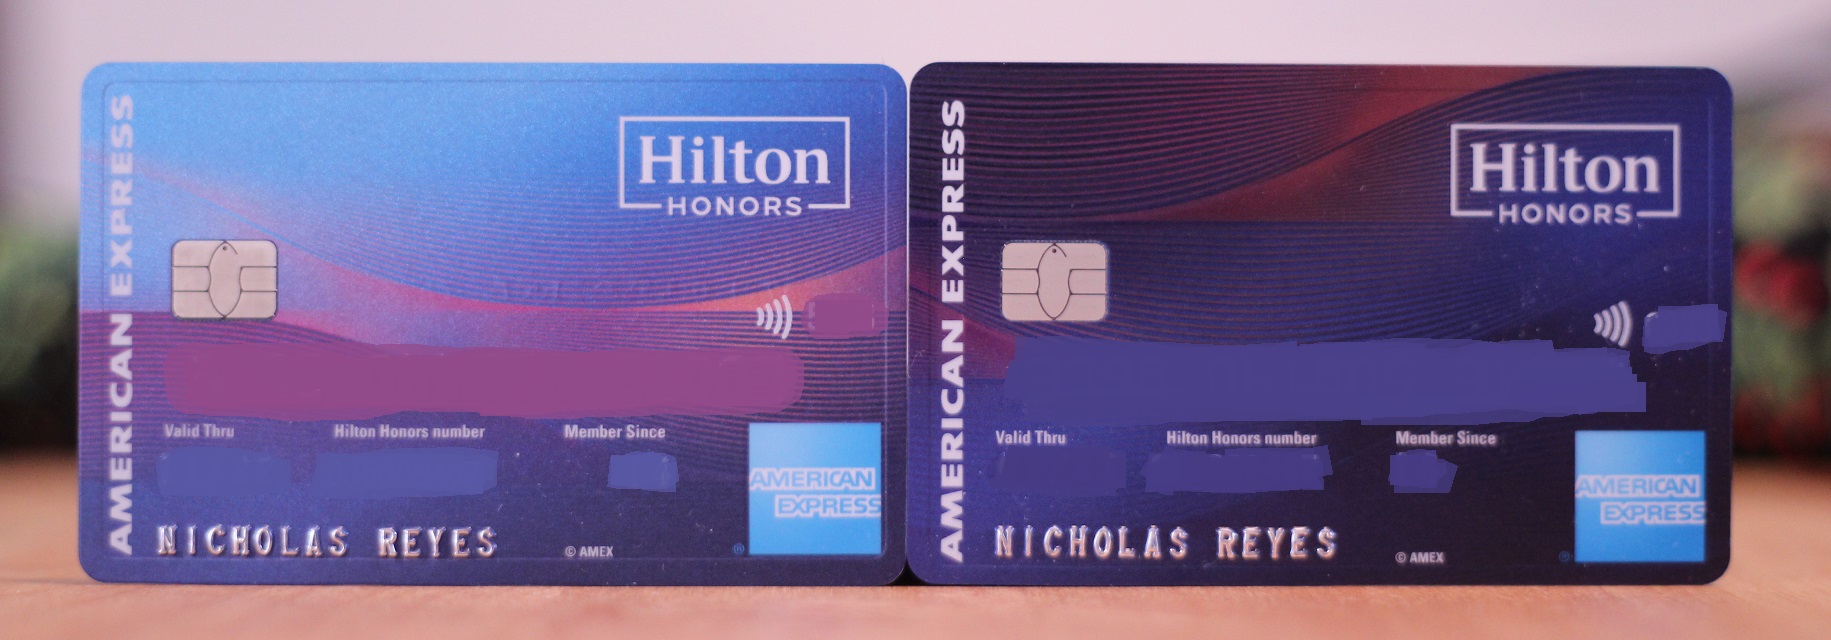 Does it ever make sense to spend on a Hilton card?